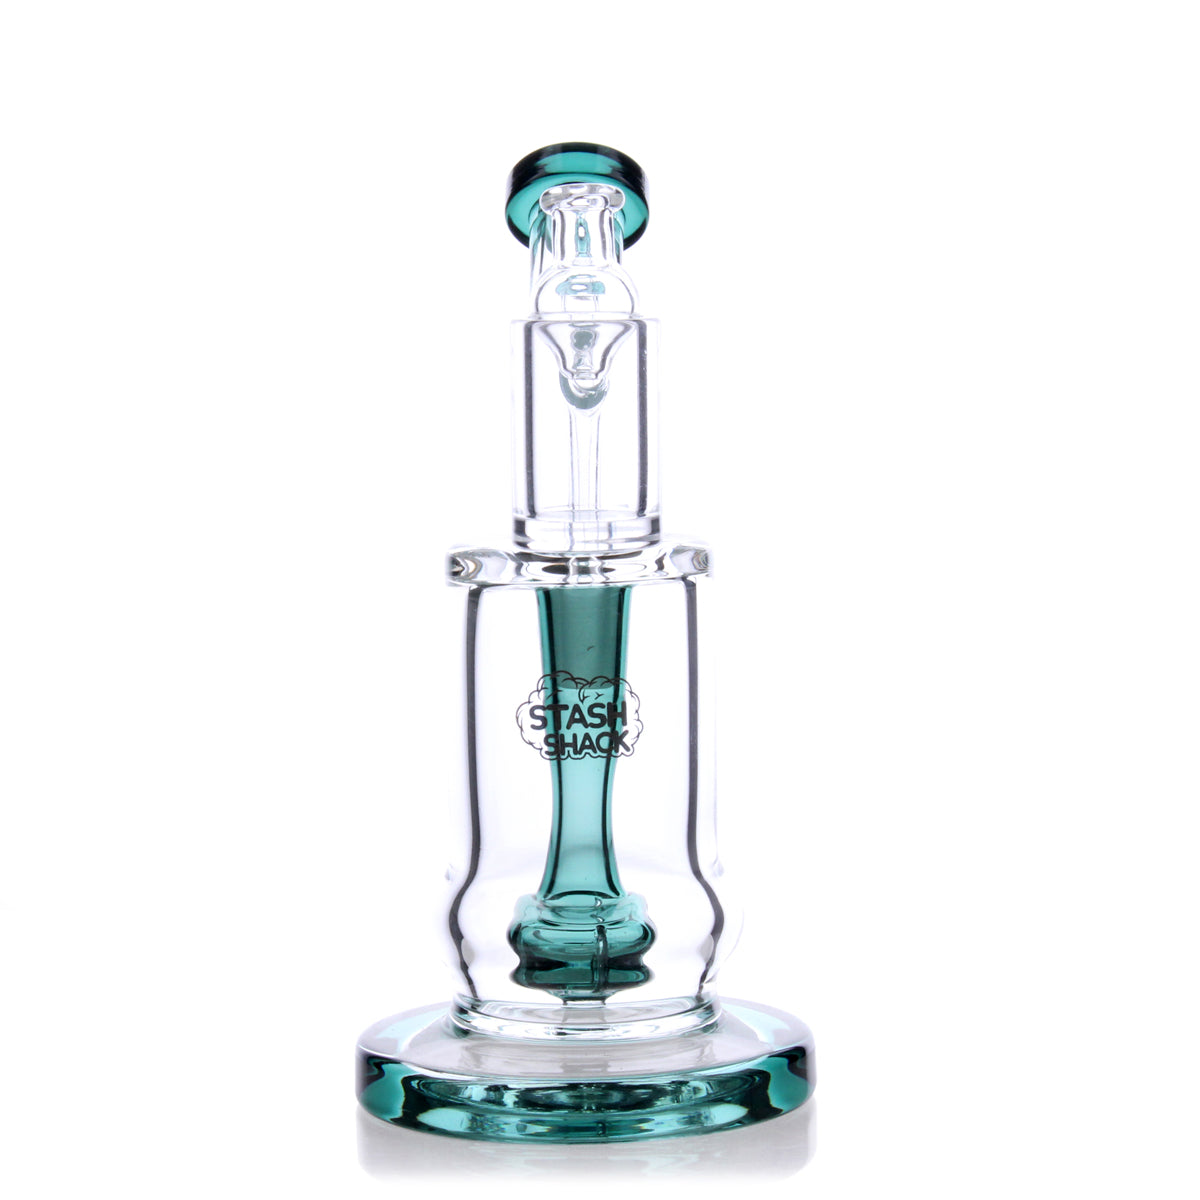 HydroBarrel Mini Rig by The Stash Shack, 5" compact borosilicate glass dab rig with showerhead percolator, front view on white background